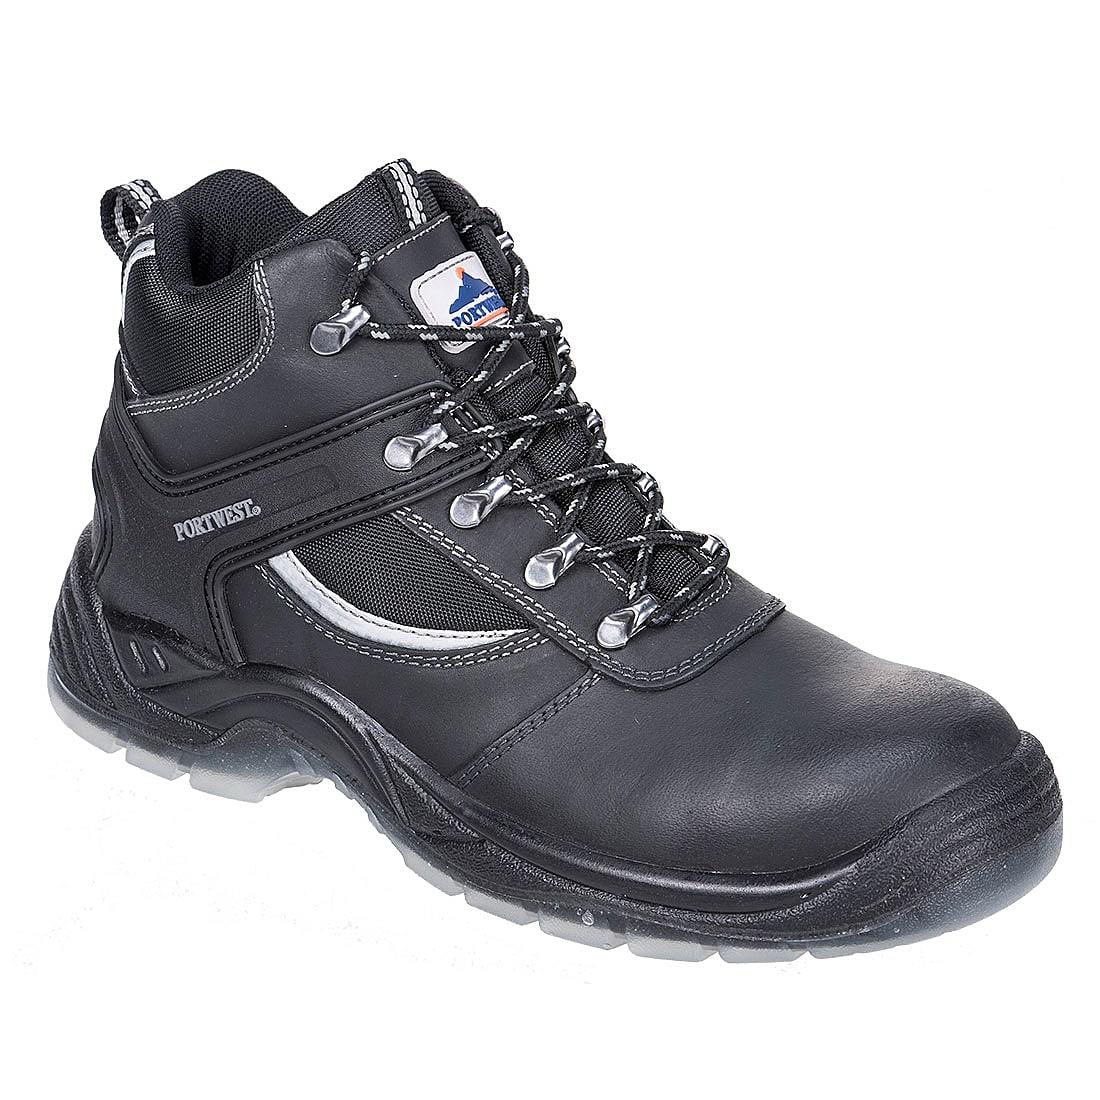 Portwest Steelite Mustang Boots S3 in Black (Product Code: FW69)